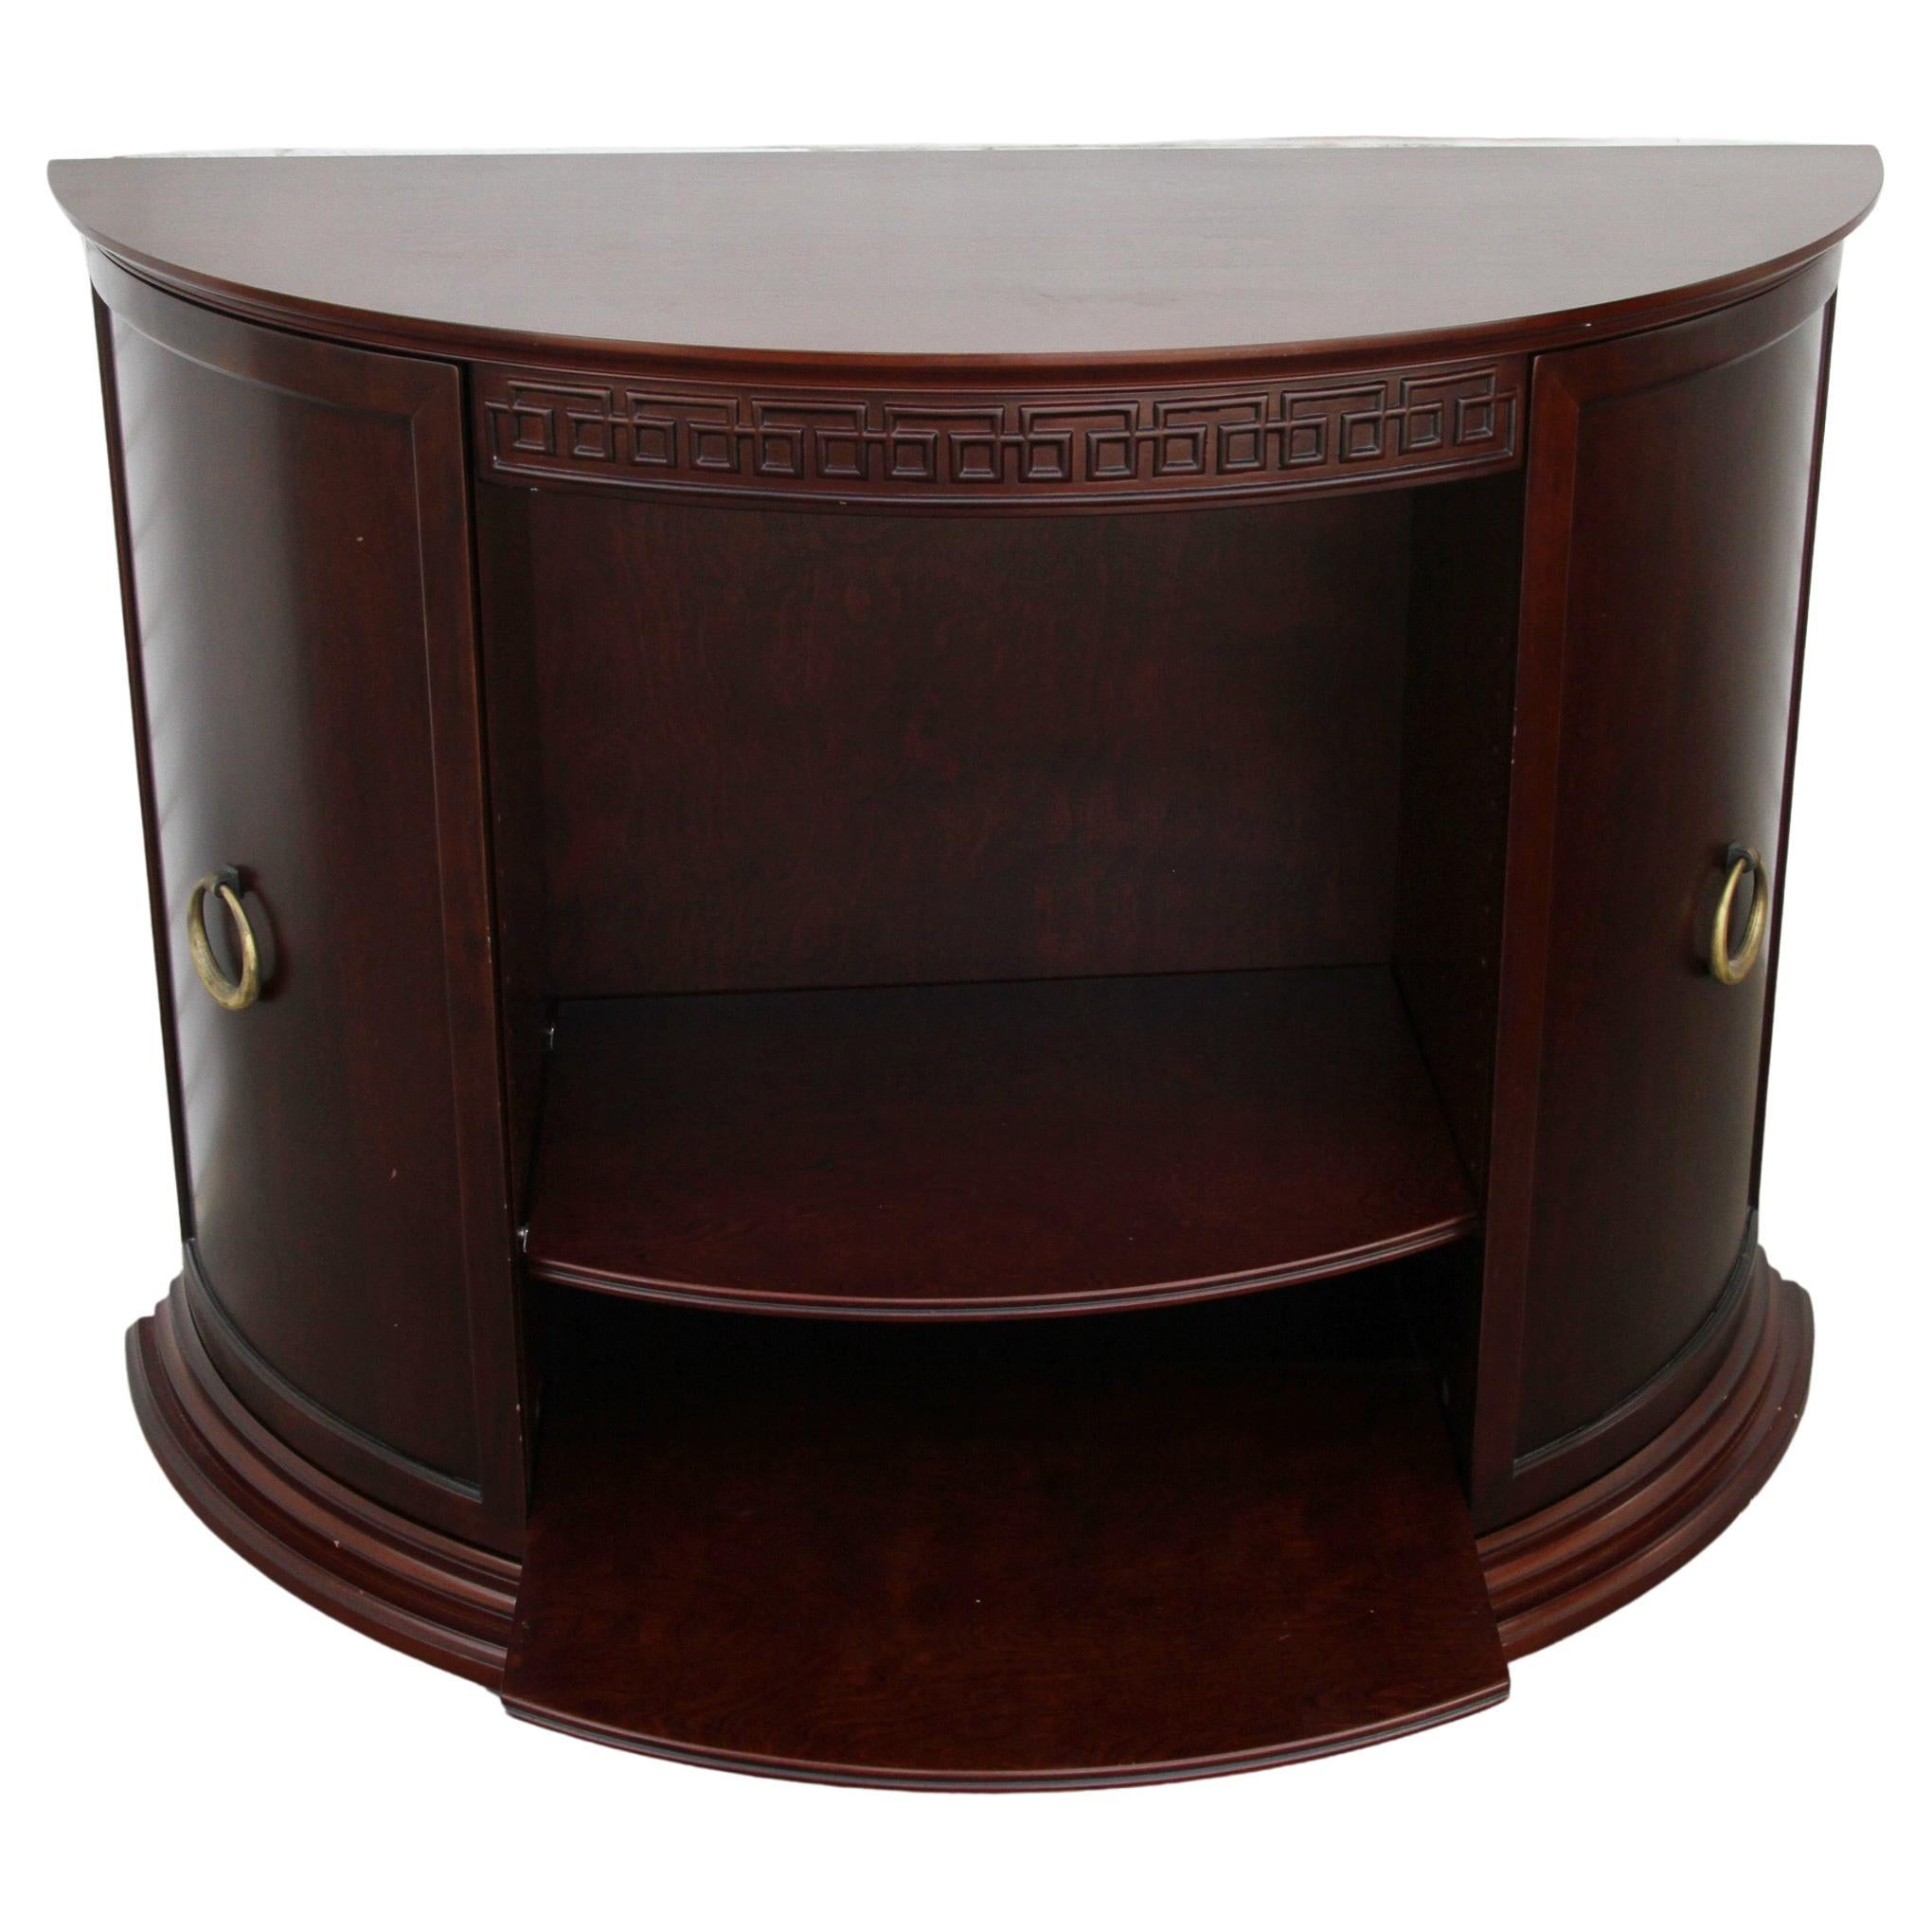 Bombay Co Demilune Entry Table

Nice cherry finish entry or media cabinet by the Bombay Company.  Fertures two closed cabinets with shelving  and one tablet pull out at base. Brass pulls. Greek key details at top. 

